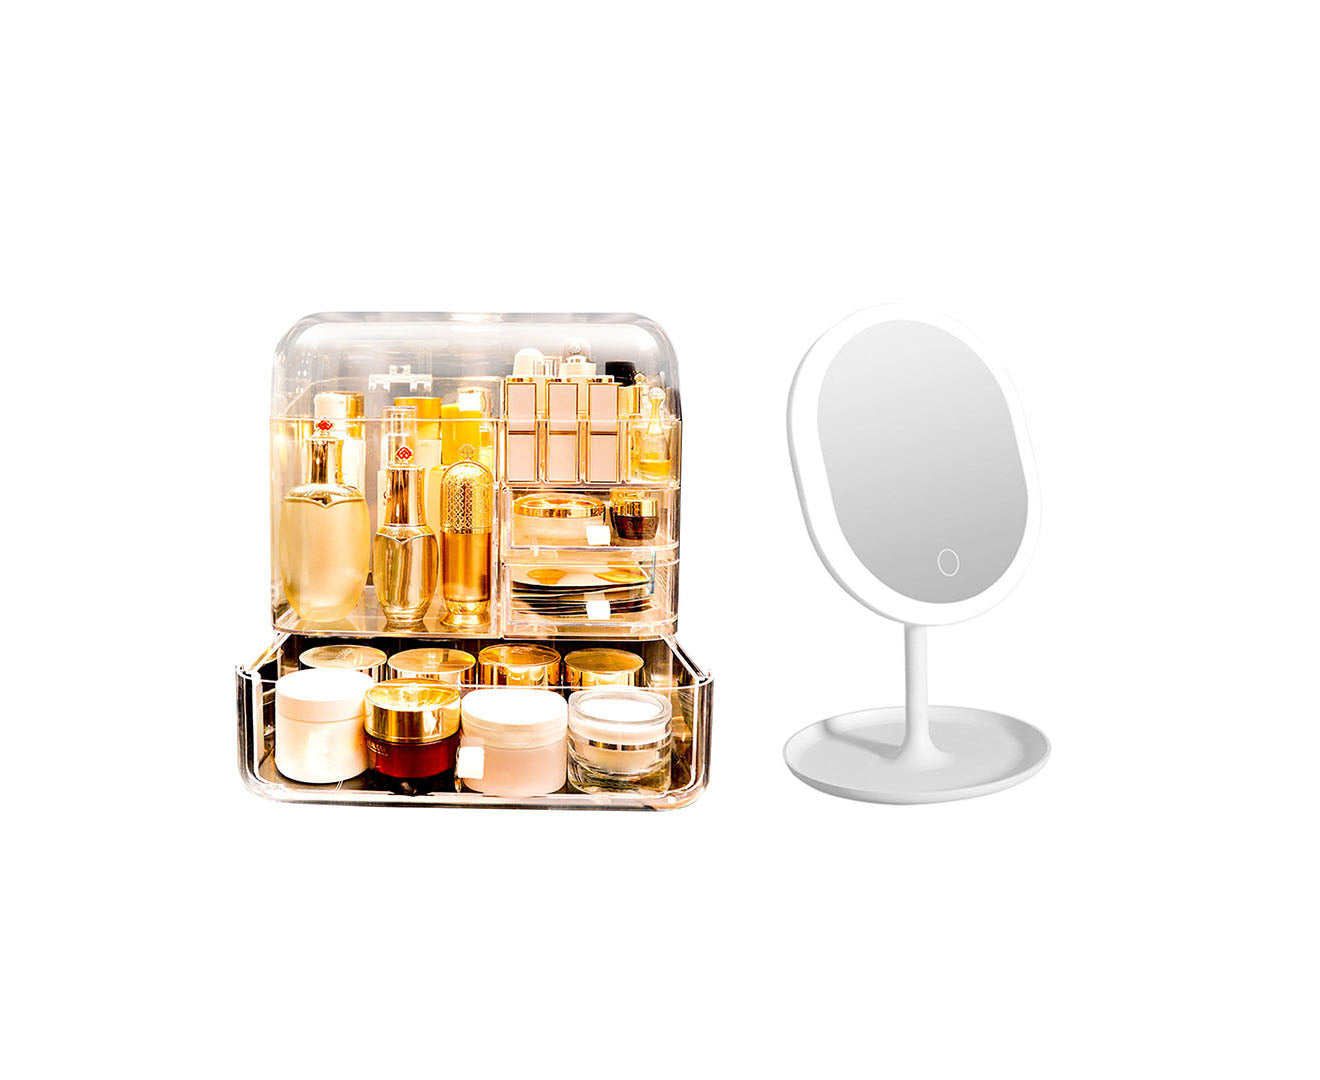 SOGA Transparent Cosmetic Storage Skincare Holder and 20cm White Rechargeable LED Light Makeup Tabletop Mirror Set - Deals499